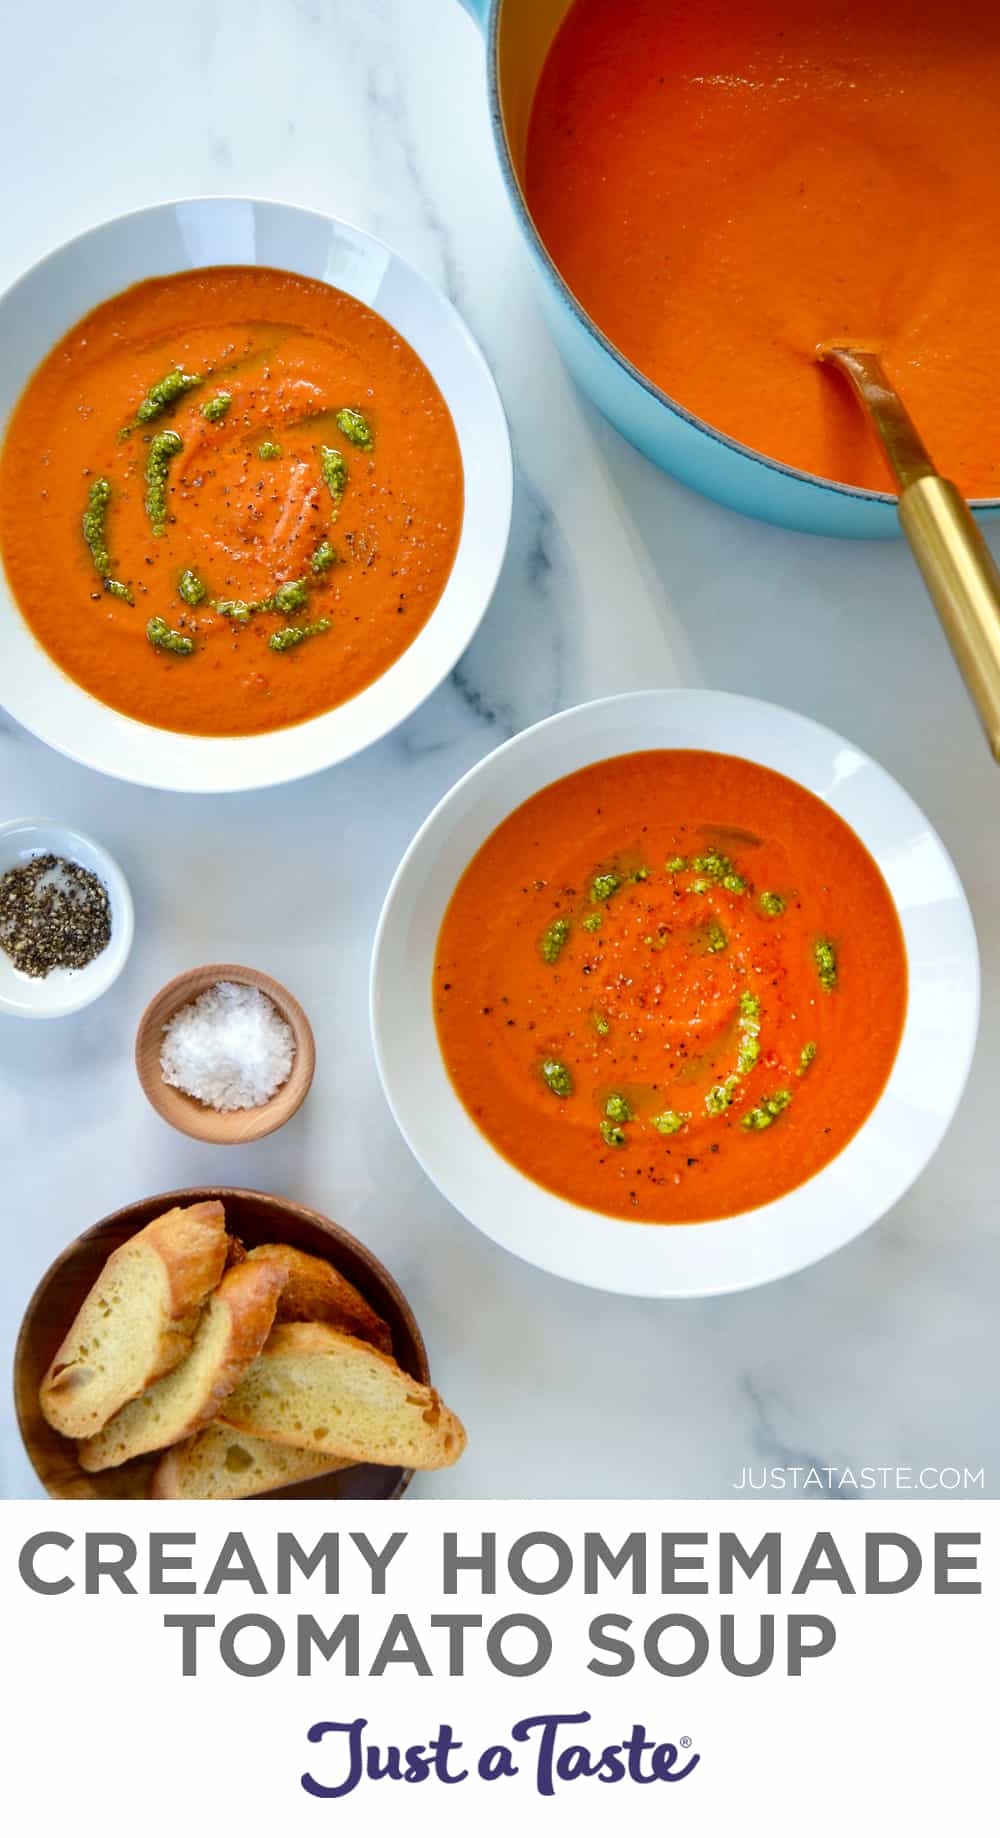 Creamy Homemade Tomato Soup - Just a Taste